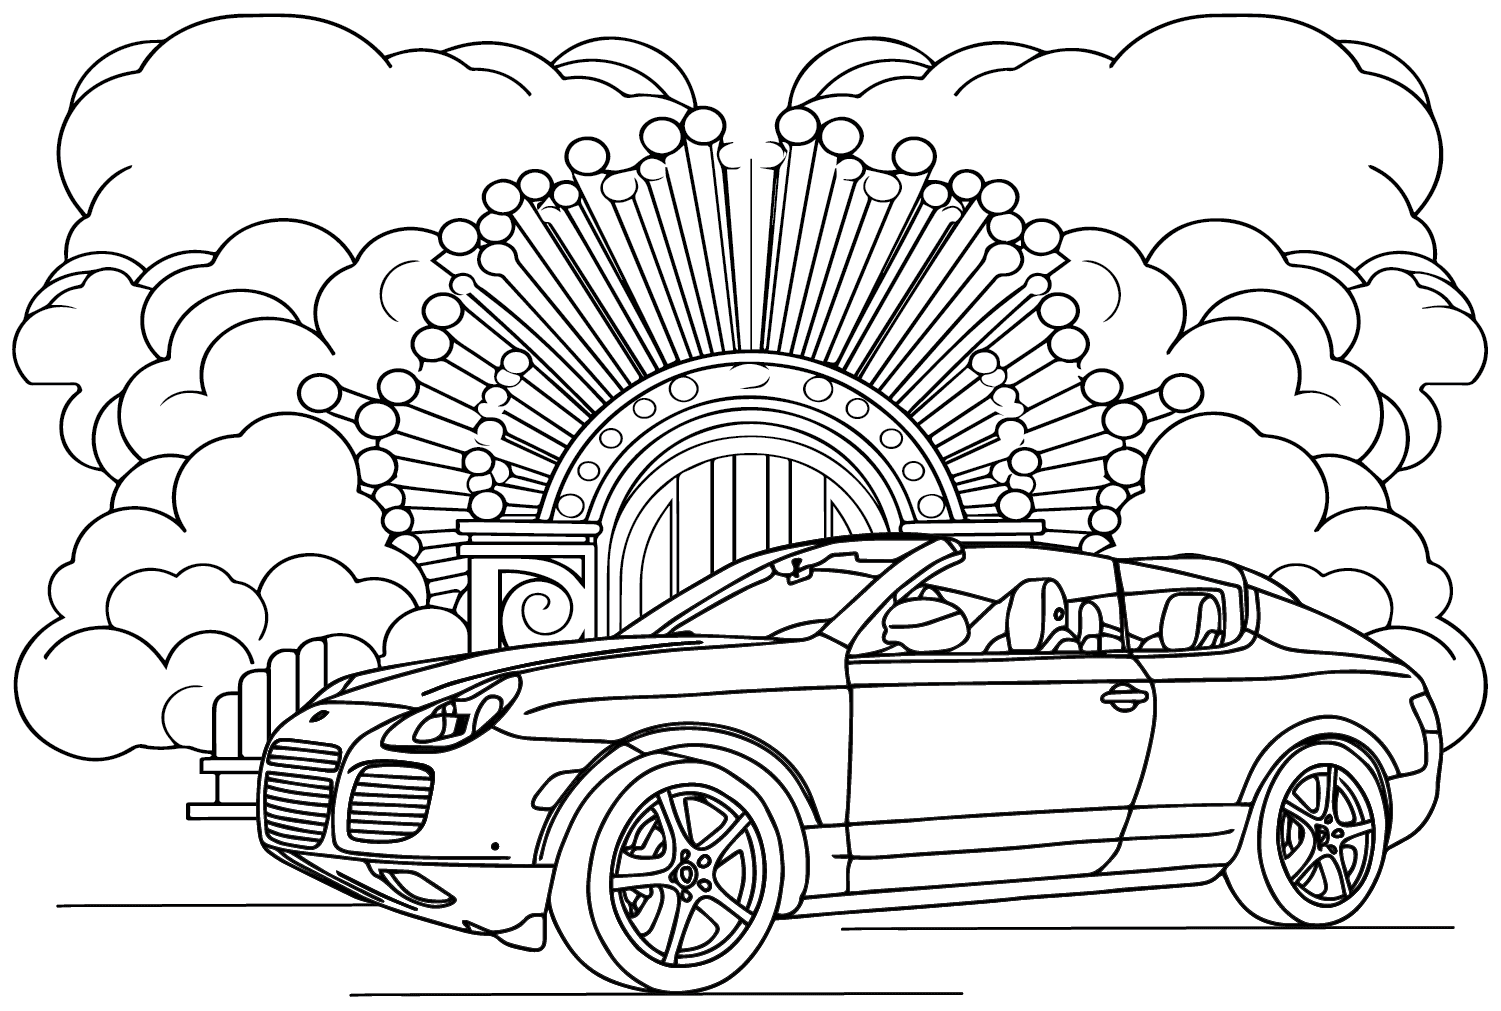 Porsche Cayenne Cabriolet Coloring Page - Free Printable Coloring Pages